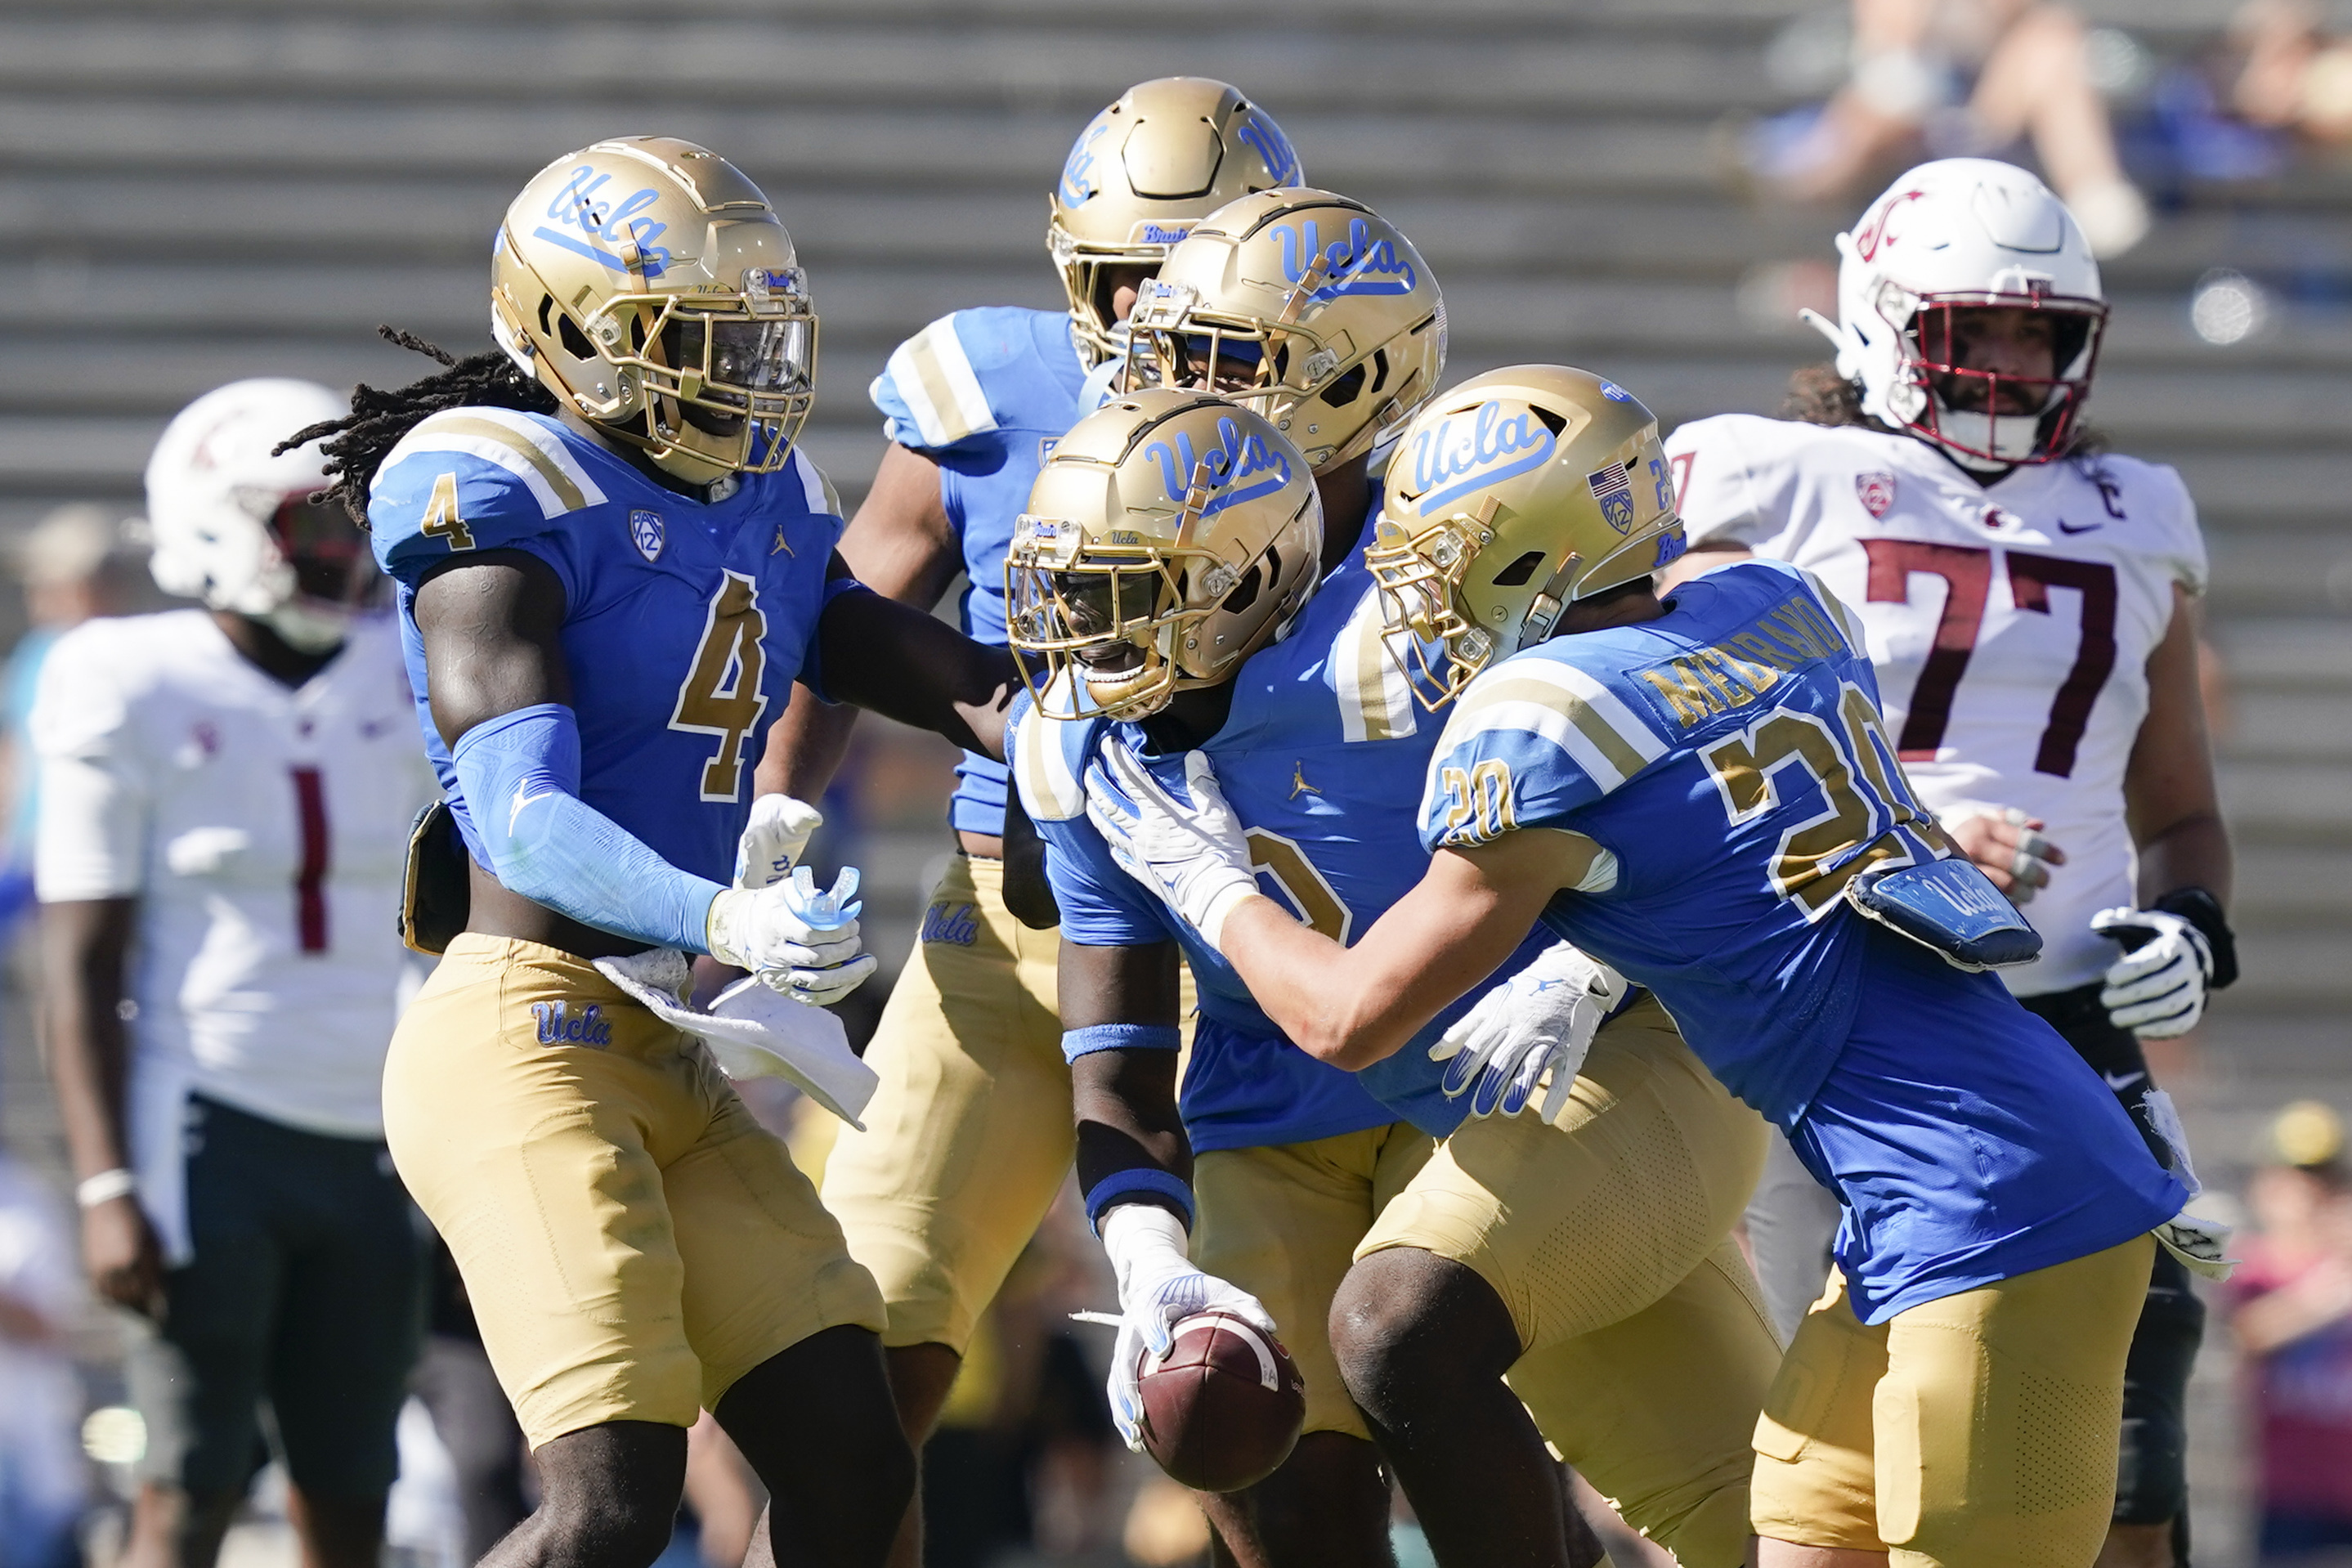 UCLA linebacker Oluwafemi Oladejo, center, is surrounded by teammates after intercepting a pass from Washington State quarterback Cameron Ward during the second half of an NCAA college football game, Saturday, Oct. 7, 2023, in Pasadena, Calif. (AP Photo/Ryan Sun)